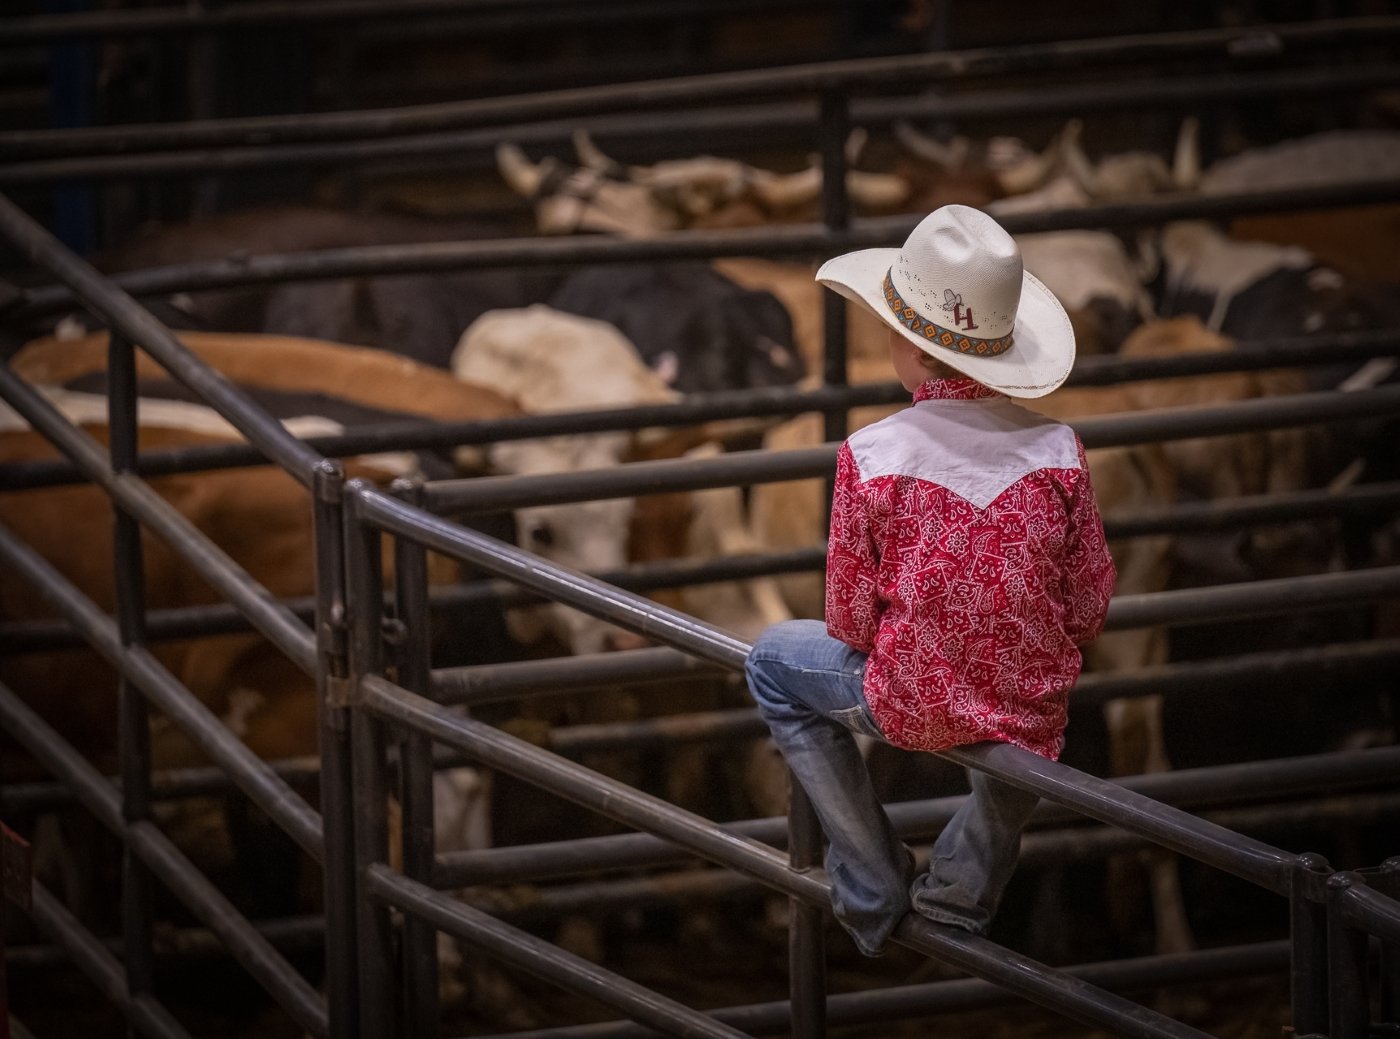 Growing Up at the Rodeo, Clinton Kemp, Dallas Camera Club, 3rd Place